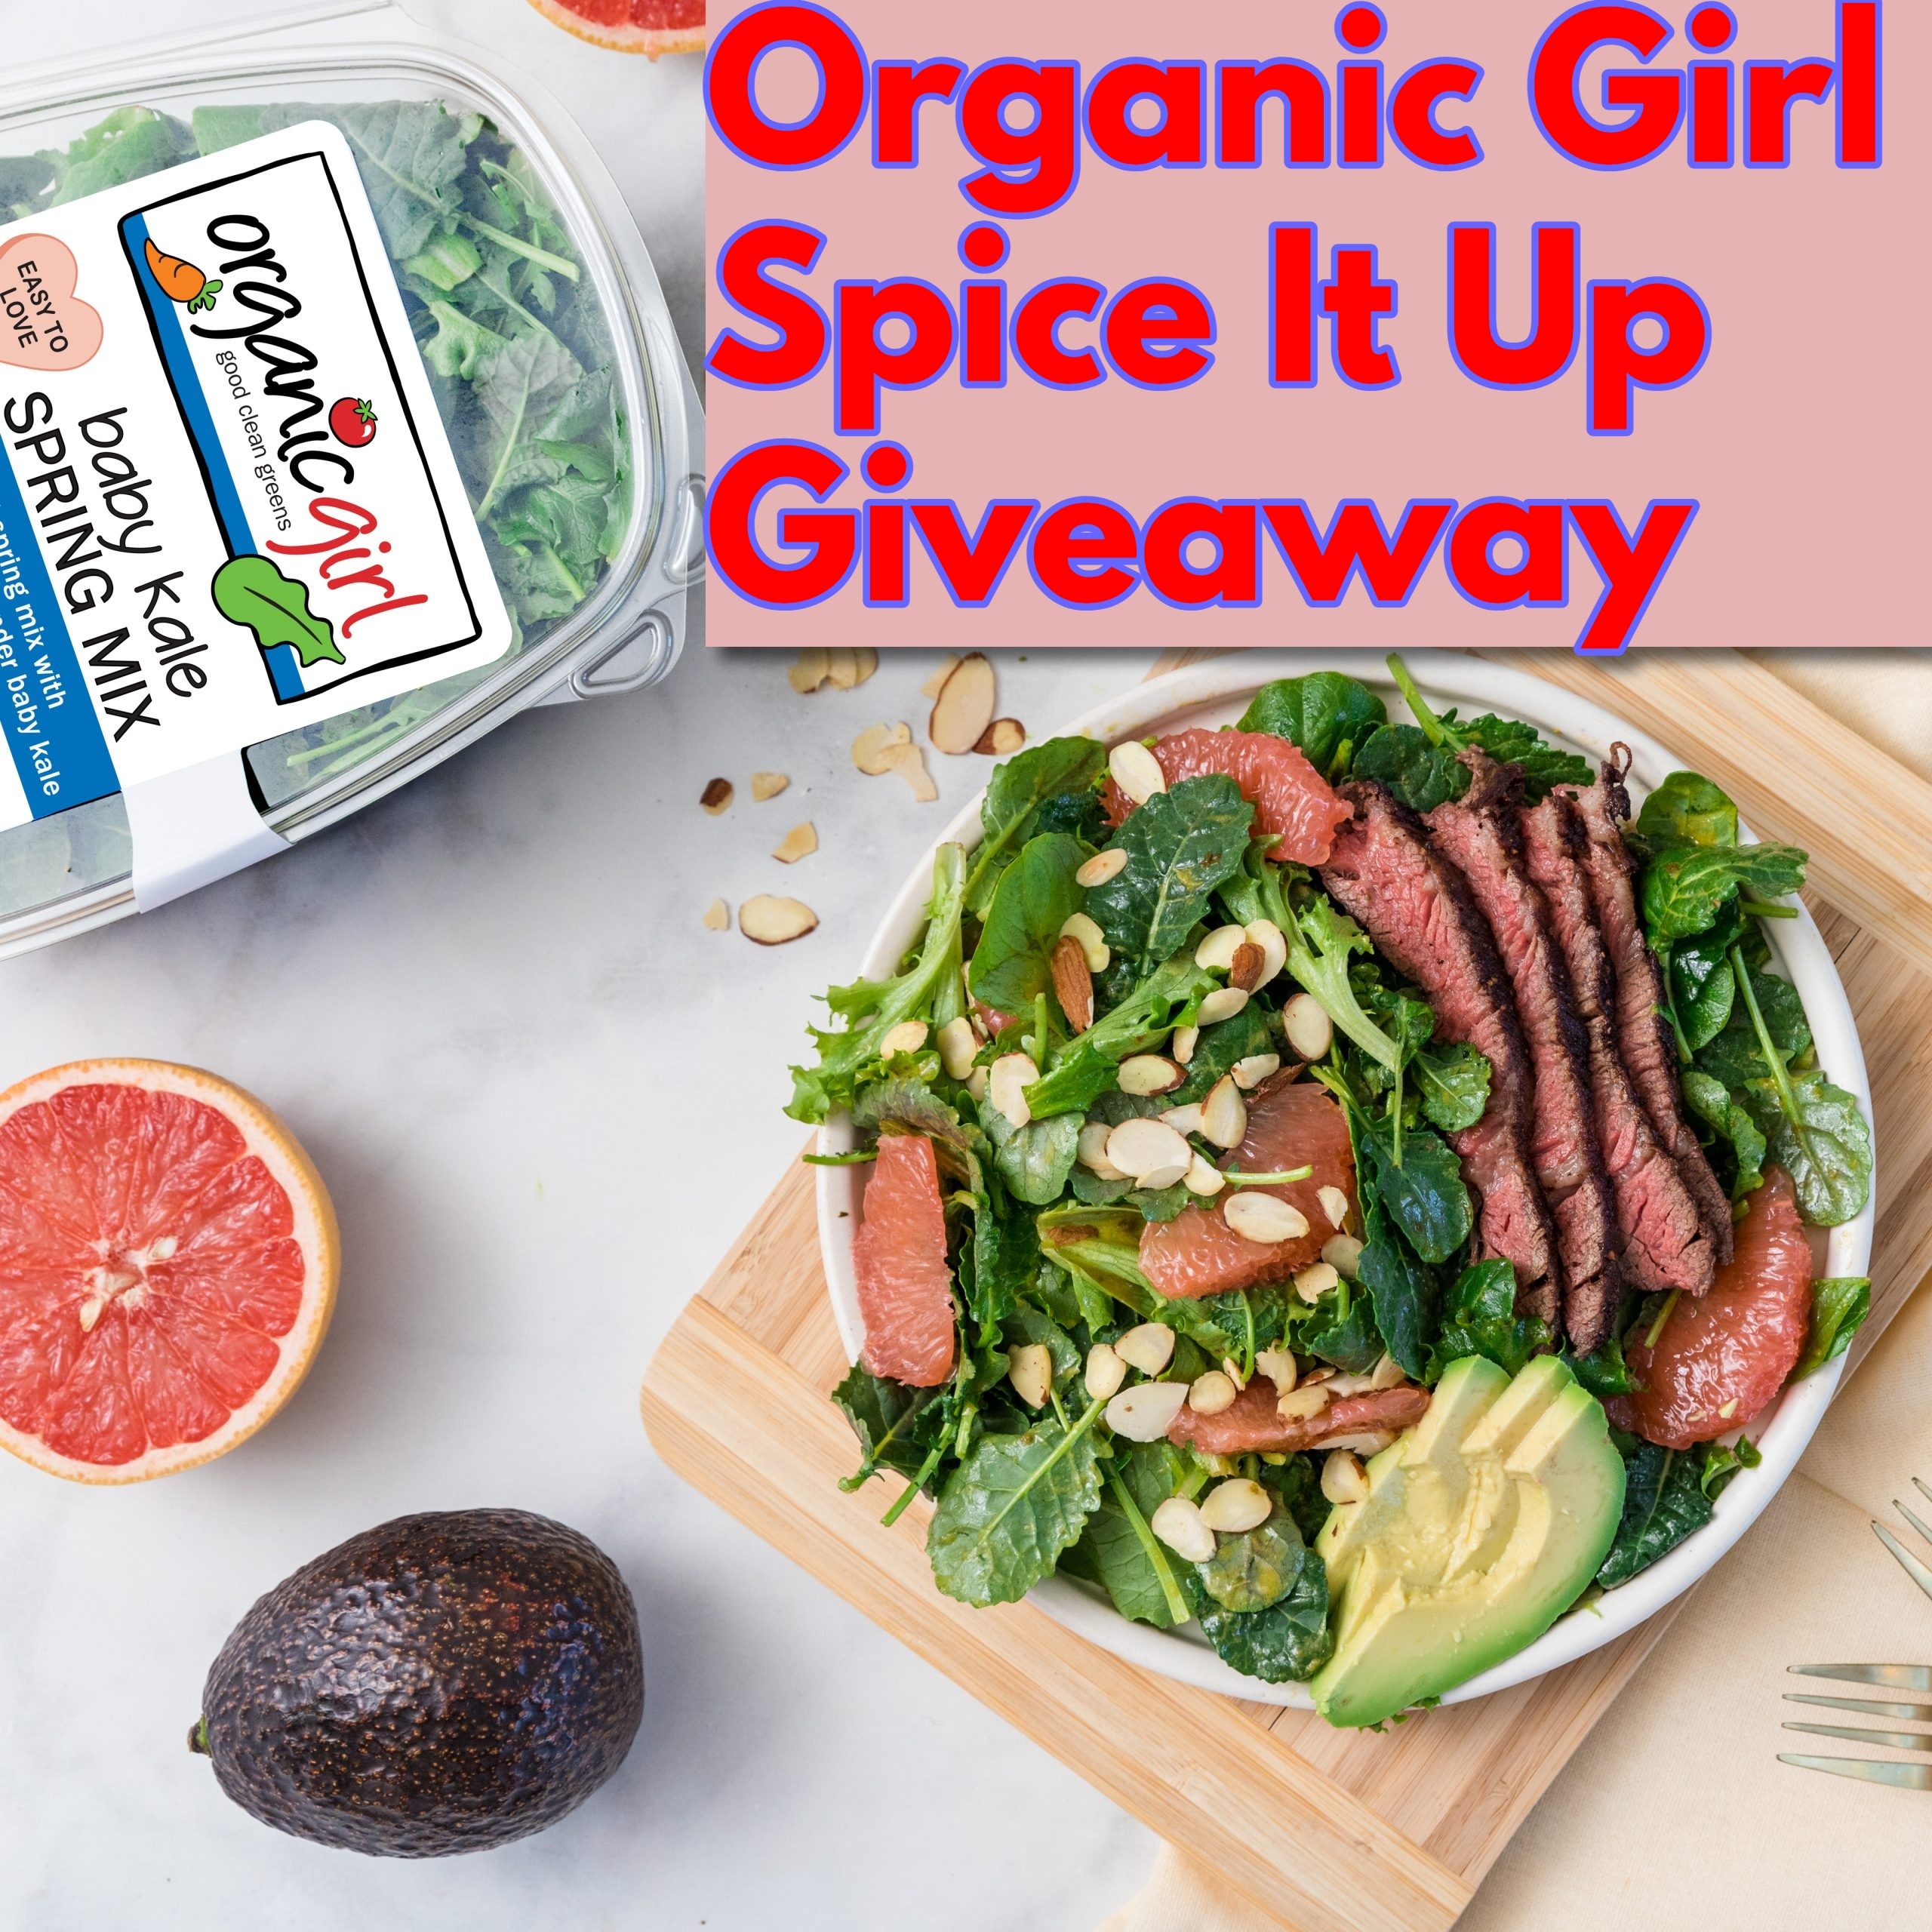 Organic Girl Spice It Up Giveaway